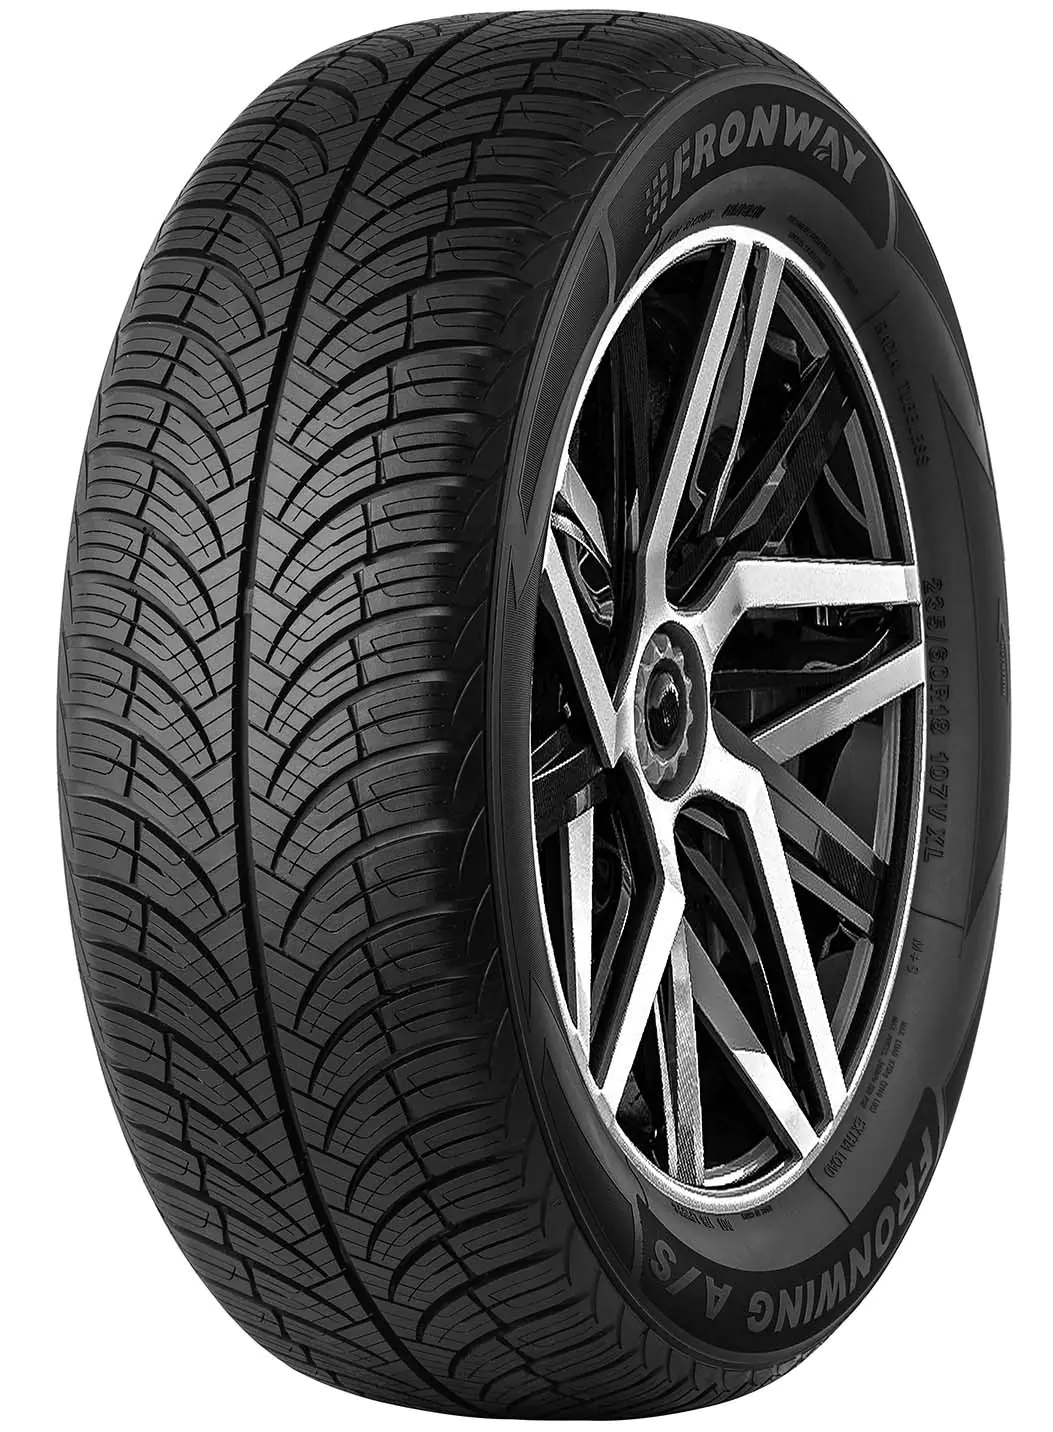 Fronway Fronway 175/65 R15 84H FRONWING A/S pneumatici nuovi All Season 